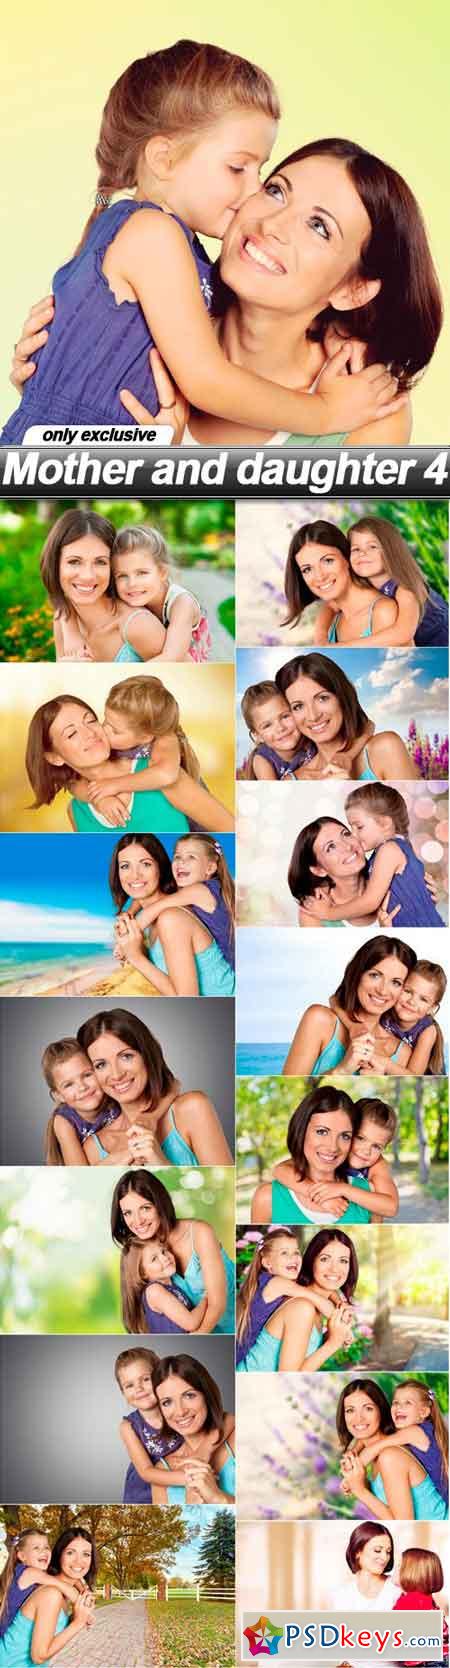 Mother and daughter 4 - 16 UHQ JPEG